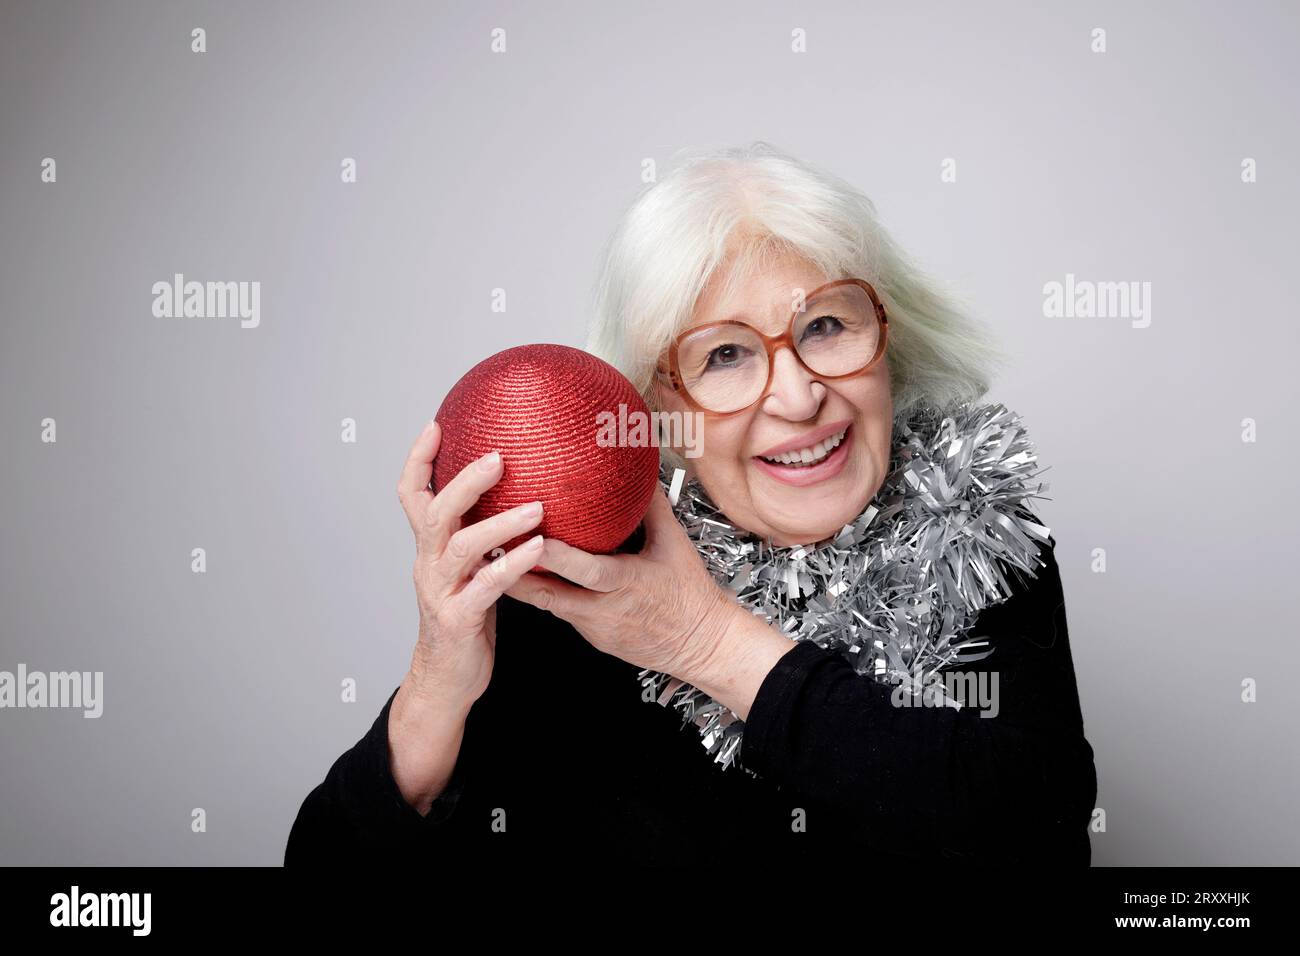 older woman with gray hair and Christmas ornaments Stock Photo